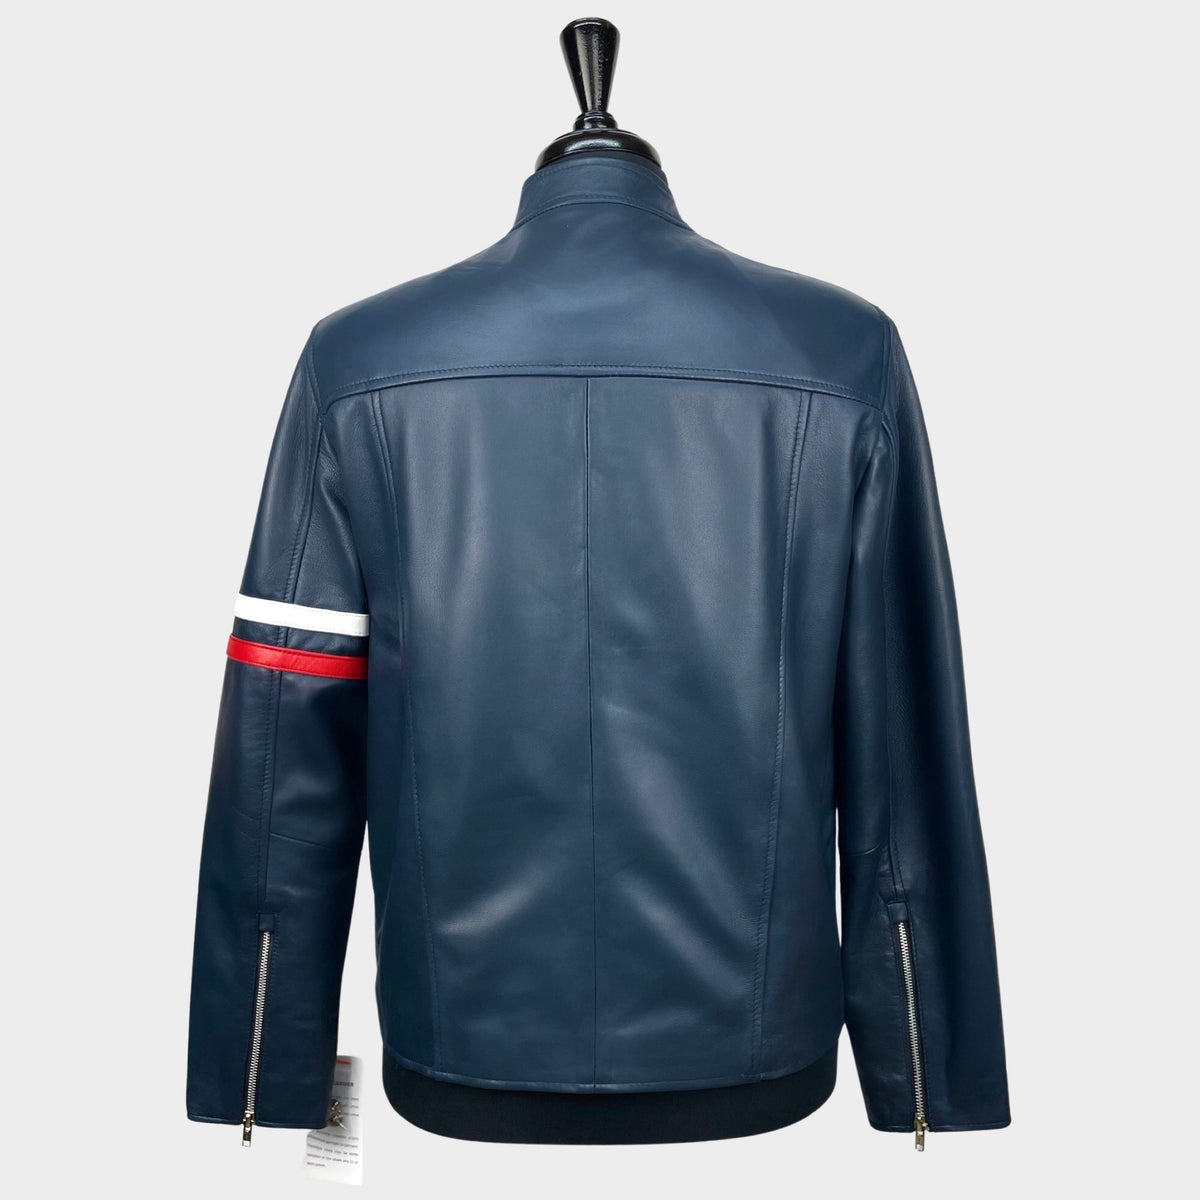 Real Hoxton Navy Cafe Racer Rally Leather Jacket